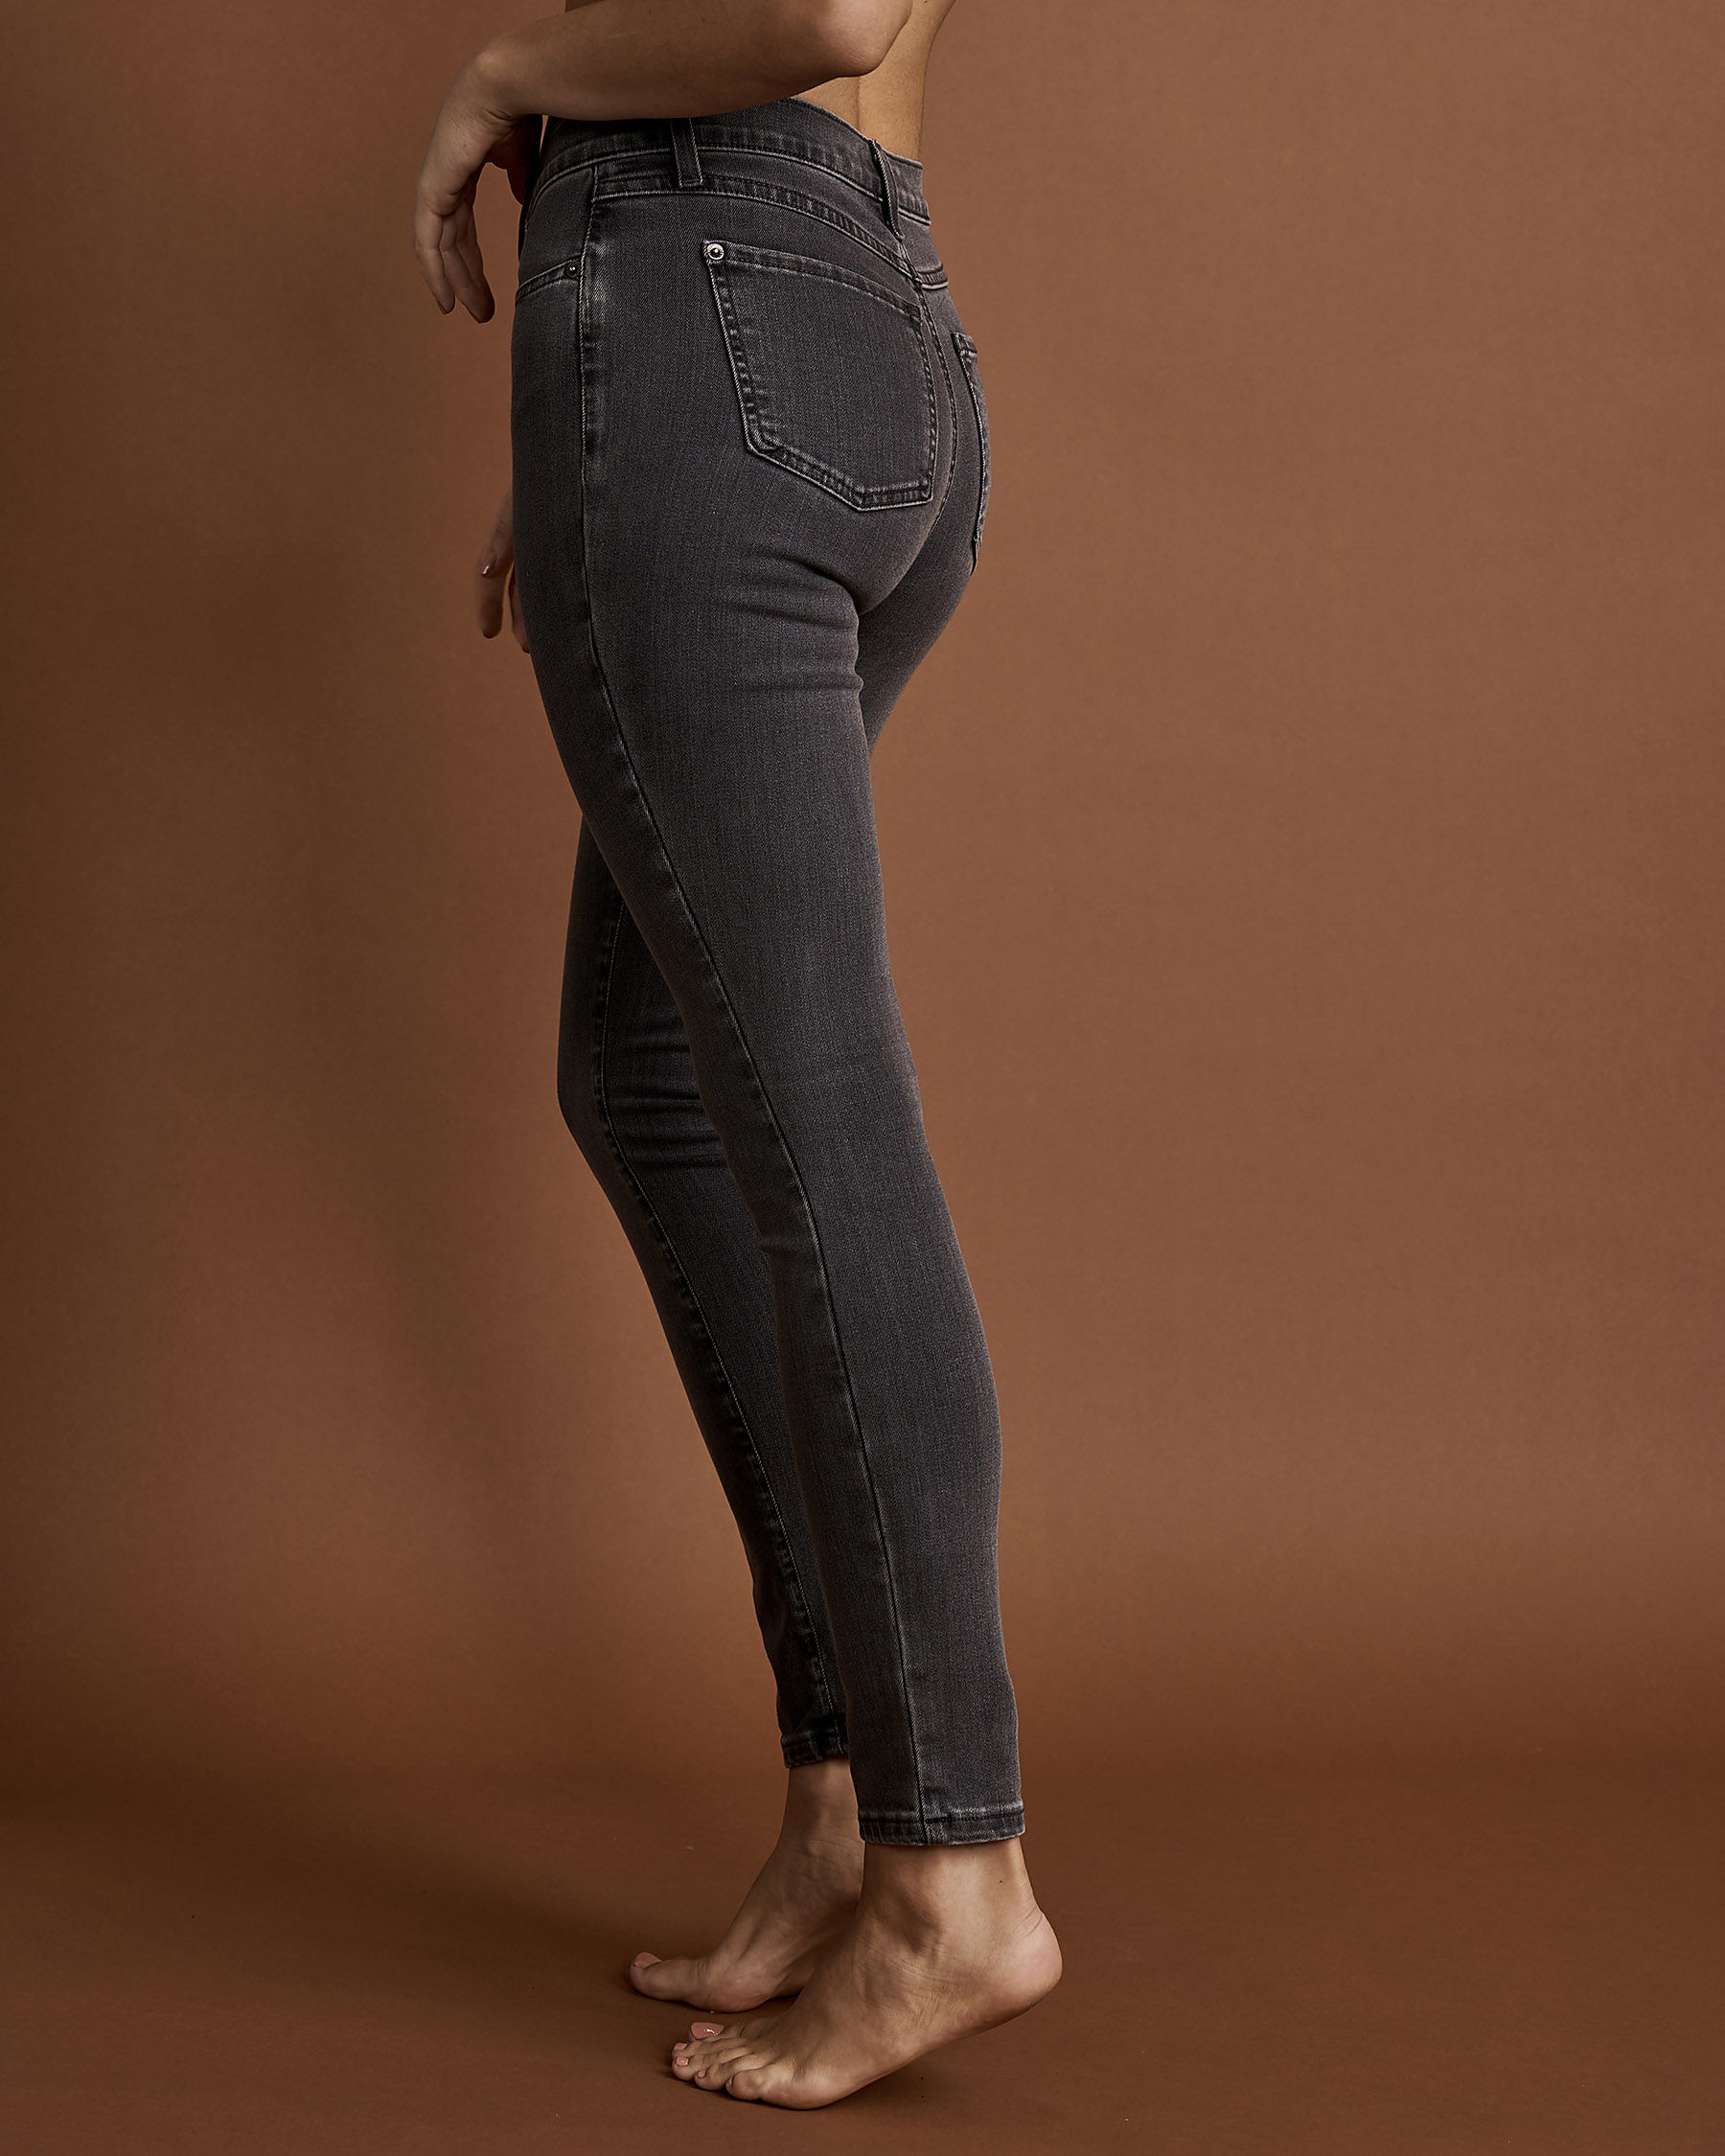 YOGA JEANS Classic Rise Skinny Jeans Grey 2009-R30 - View2